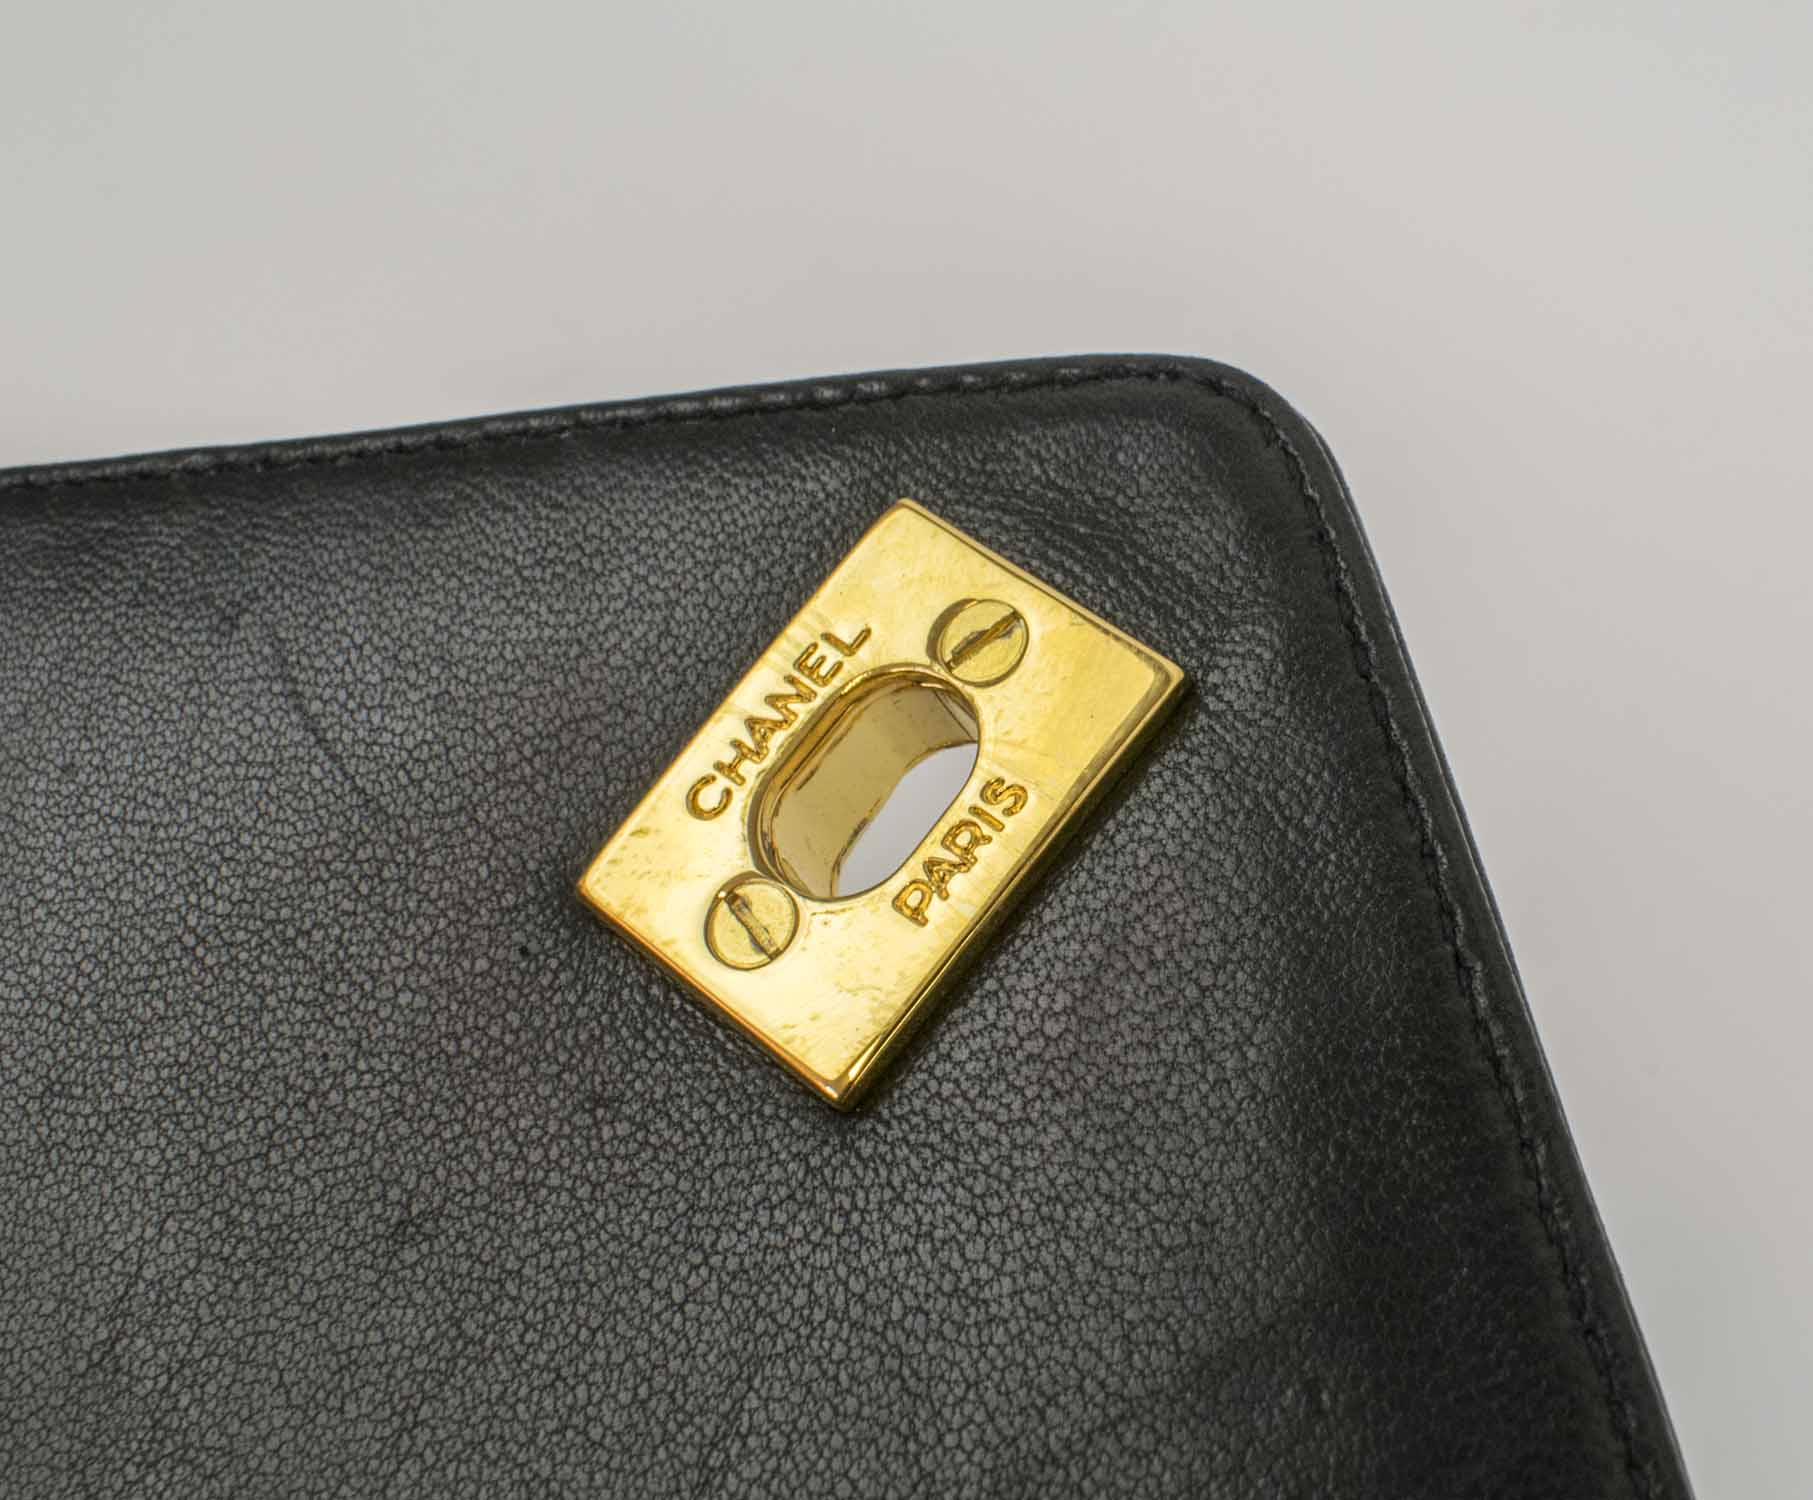 CHANEL CAMERA VINTAGE CHEVRON BAG, with top zip closure with charm pull,  one front pocket with CC turn lock closure, gold tone hardware and strap,  leather lining, authenticity card 2619847, 1991-1994, with